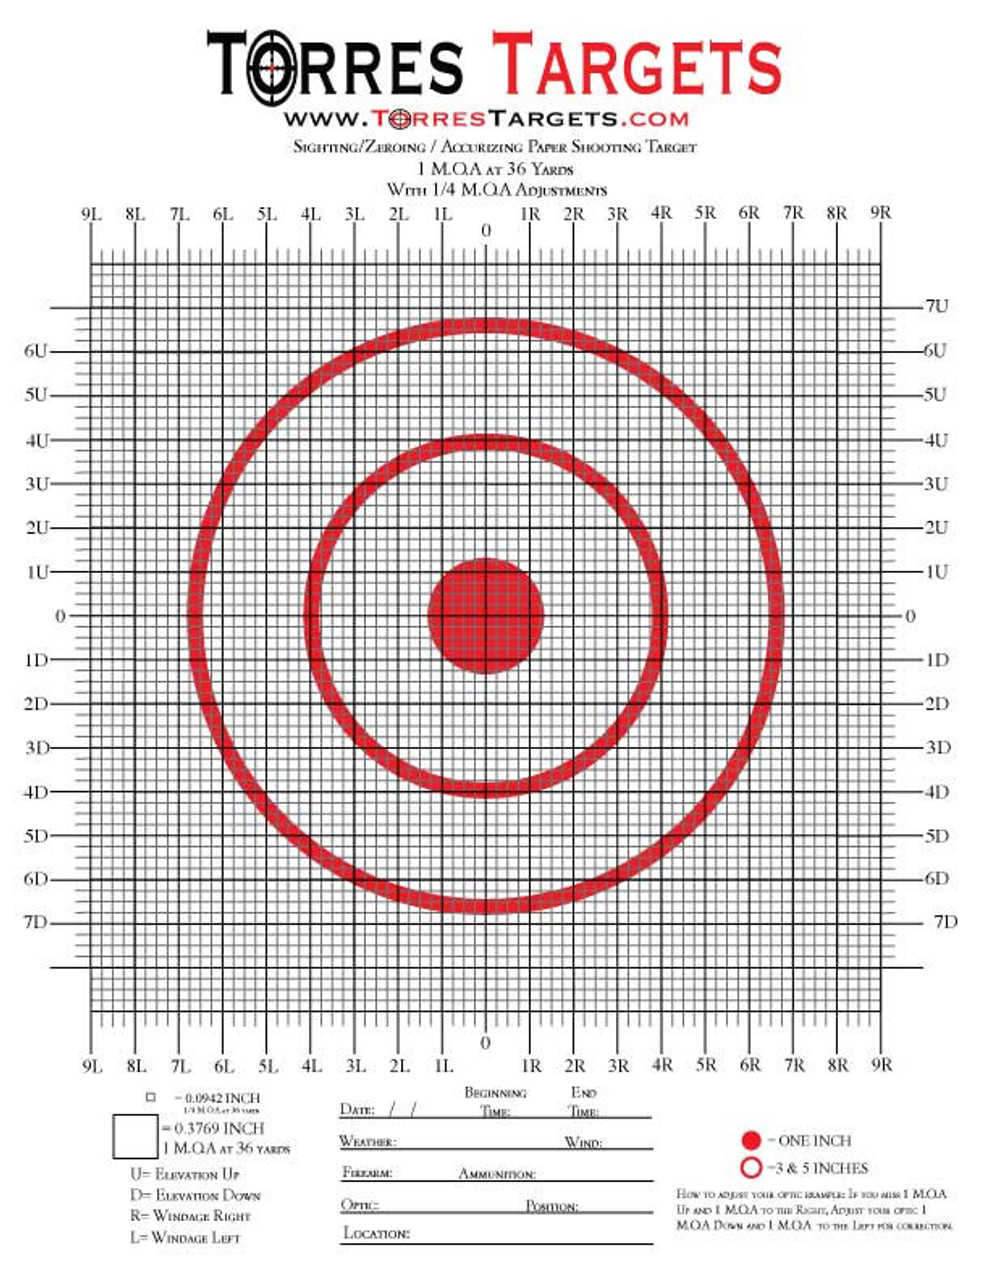 50 Yard MOA Paper Shooting Target With 1/4 MOA Adjustments 8.5x11 inches